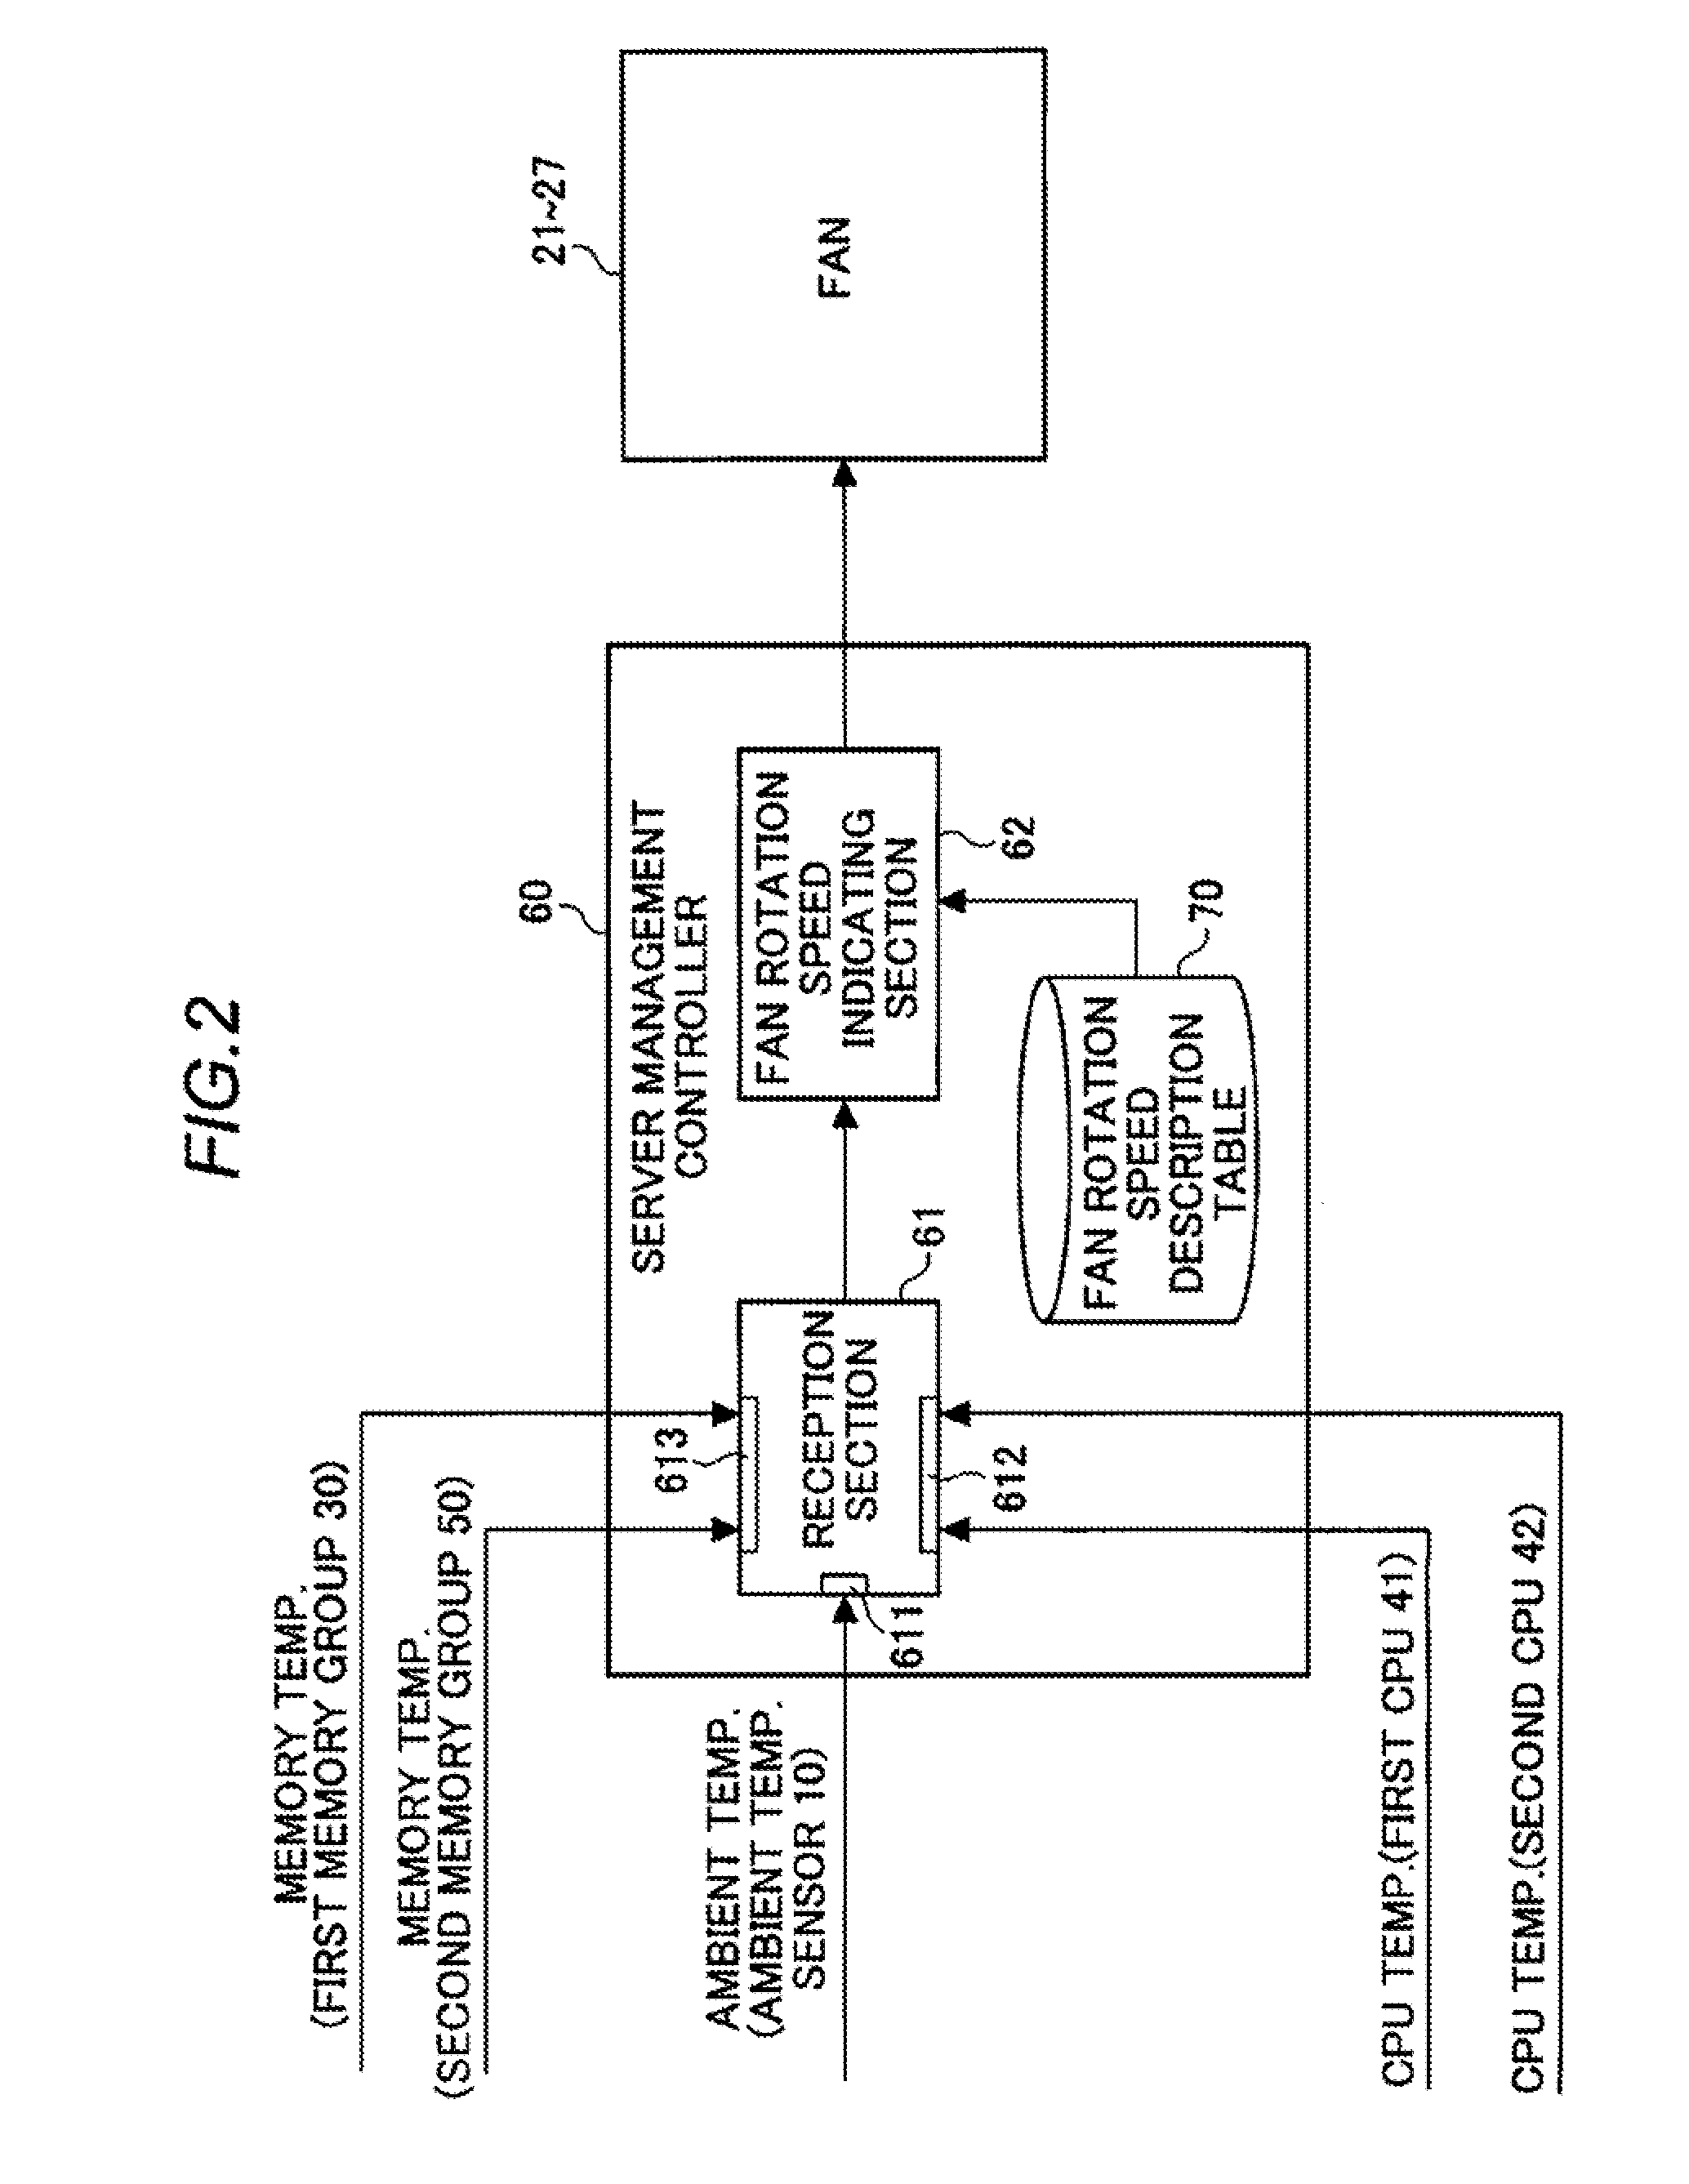 Circuit for controlling dynamic rotation speed of fan, method of controlling dynamic rotation speed of fan, and program for controlling dynamic rotation speed of fan